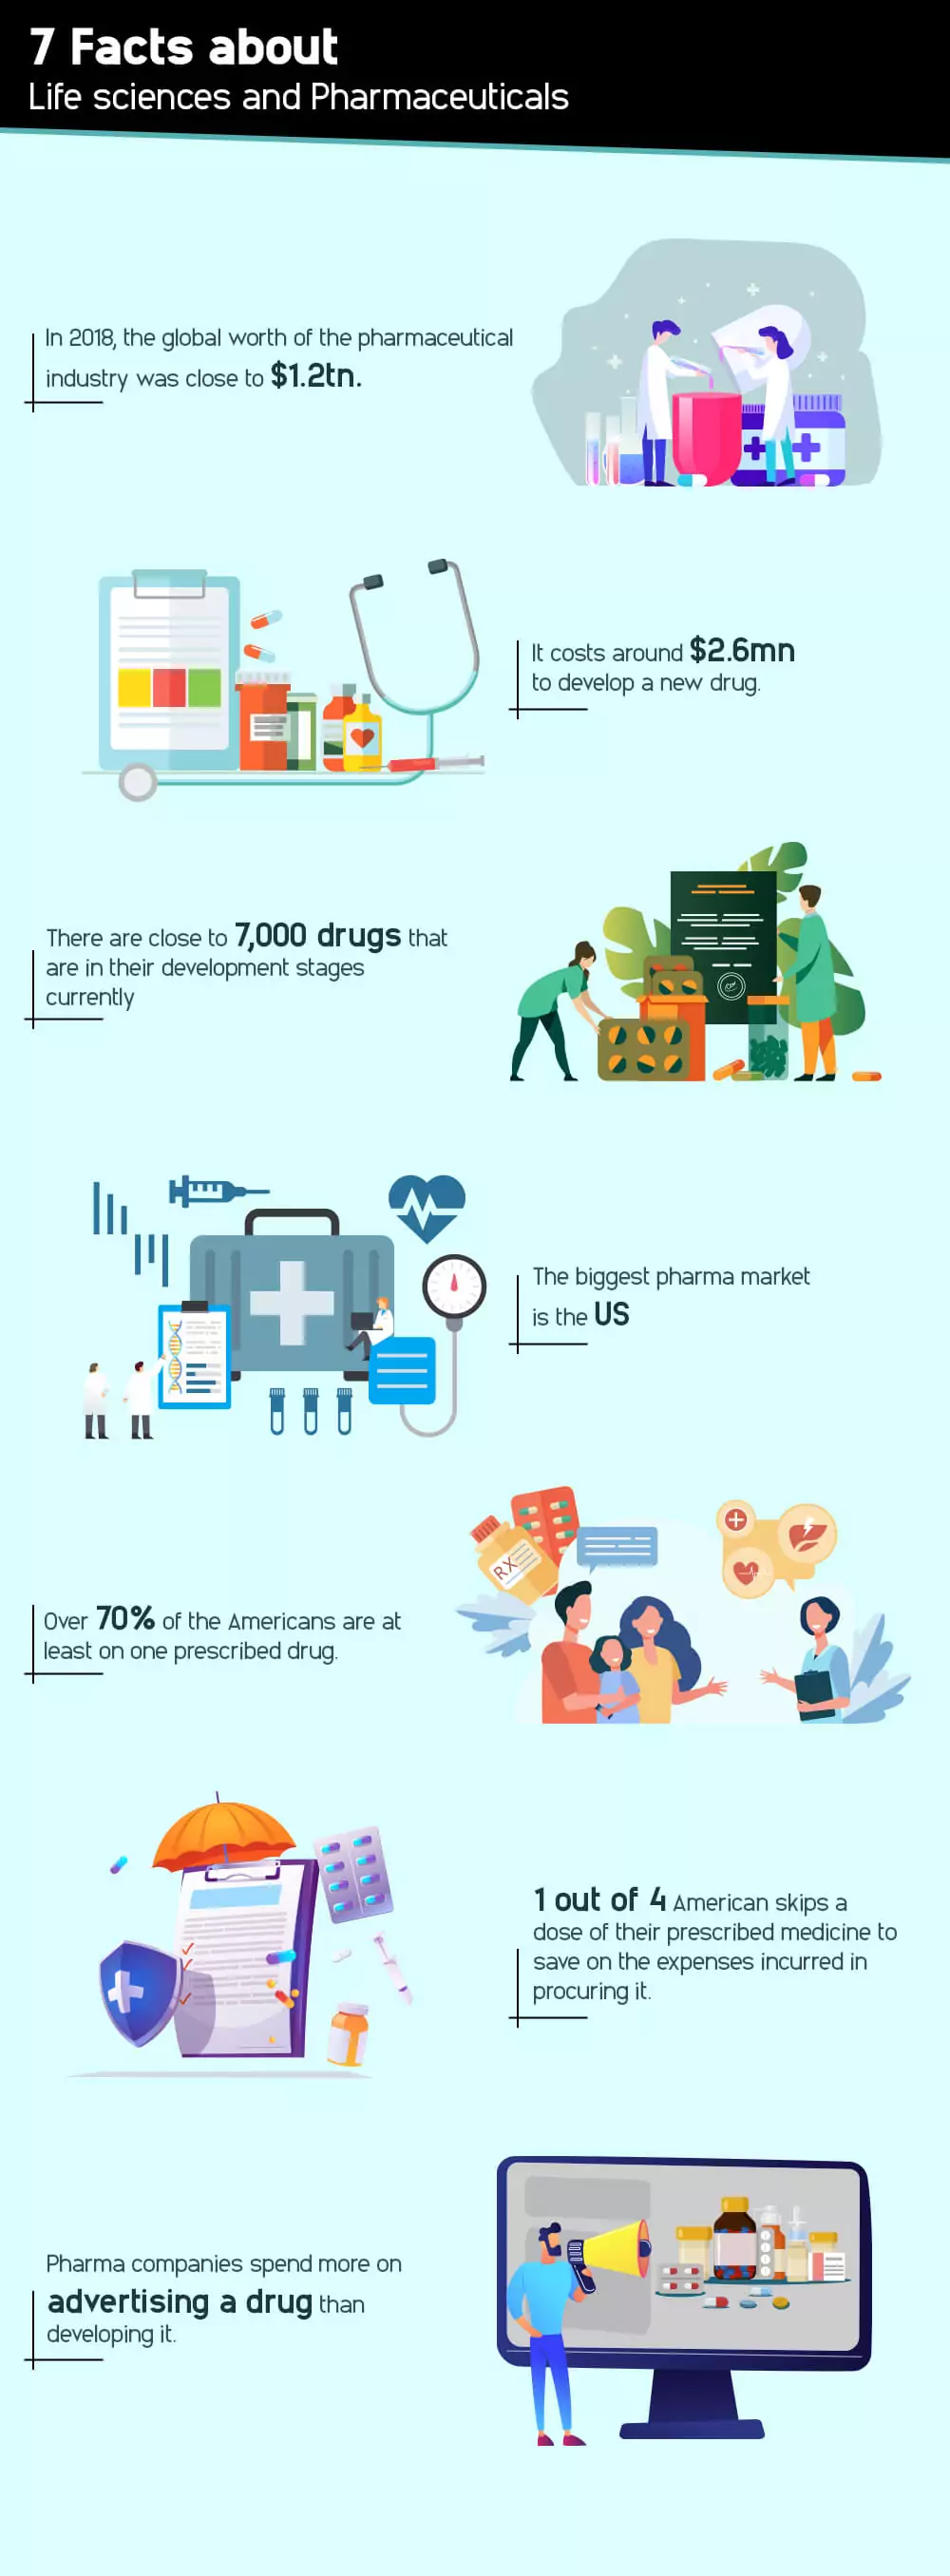 7-facts-about-life-sciences-and-pharmaceuticals.webp